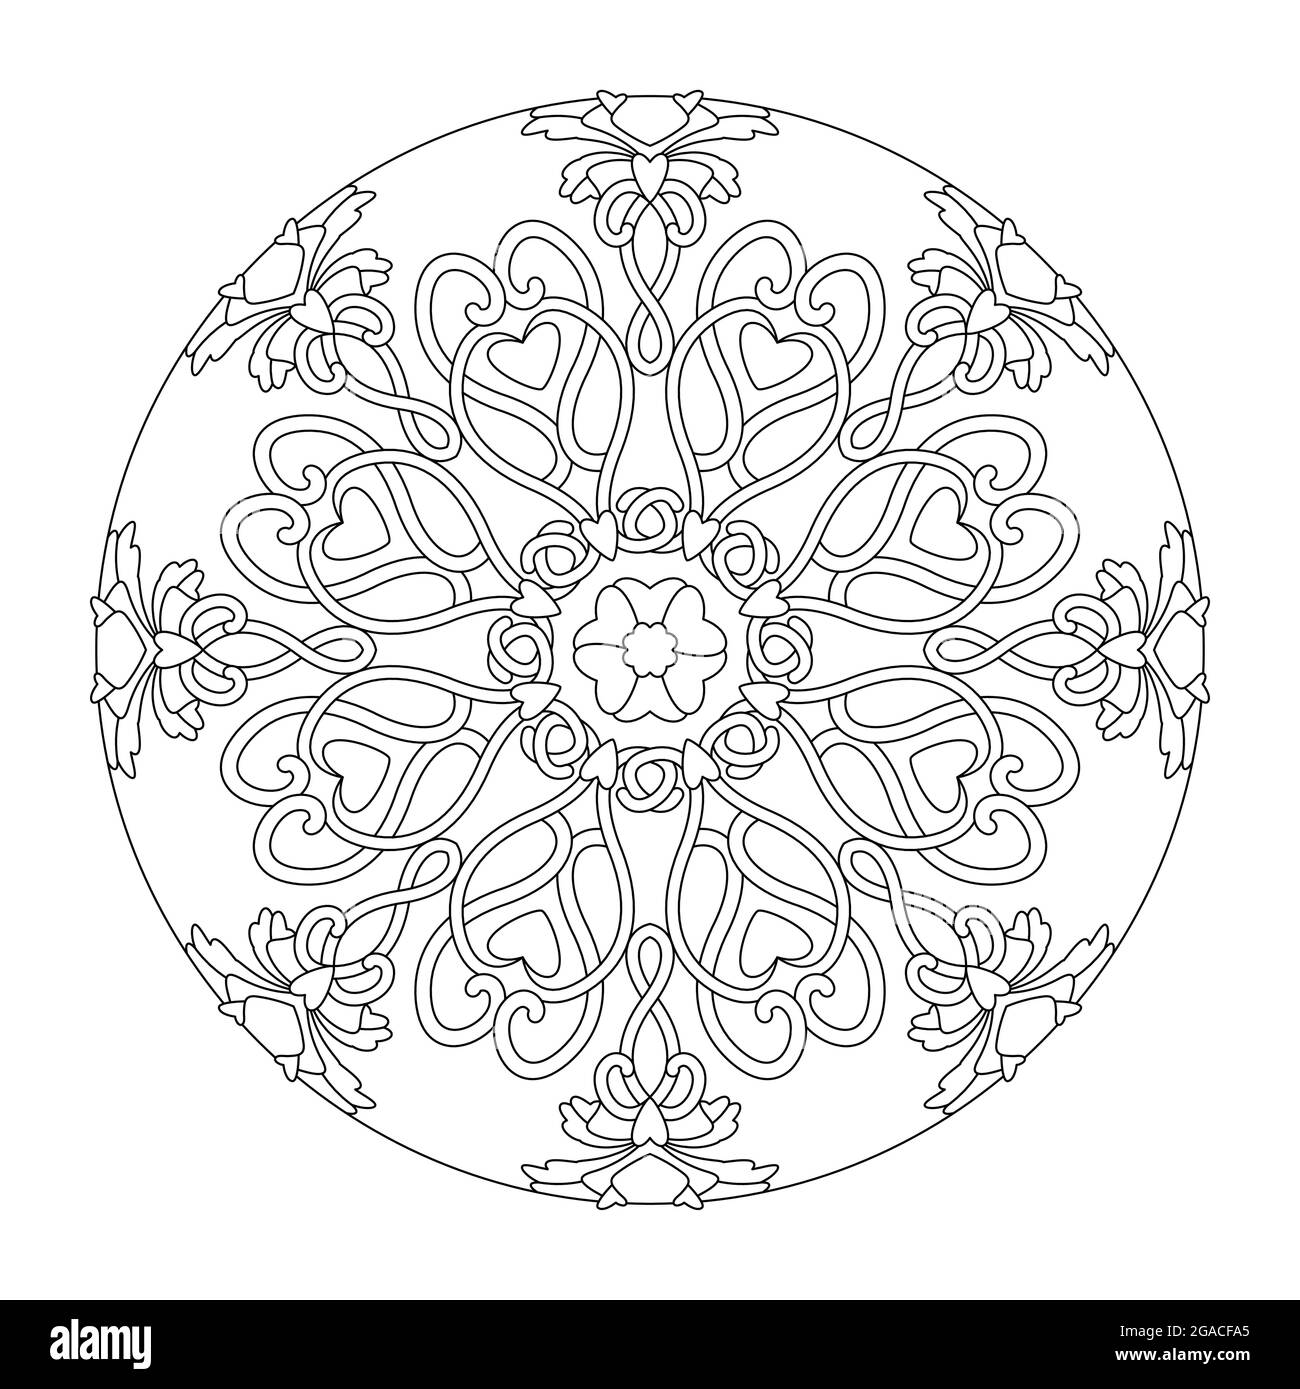 Mandala. Hearts interlaced. Anti-stress coloring page. Art Therapy. Vector illustration black and white. Stock Vector